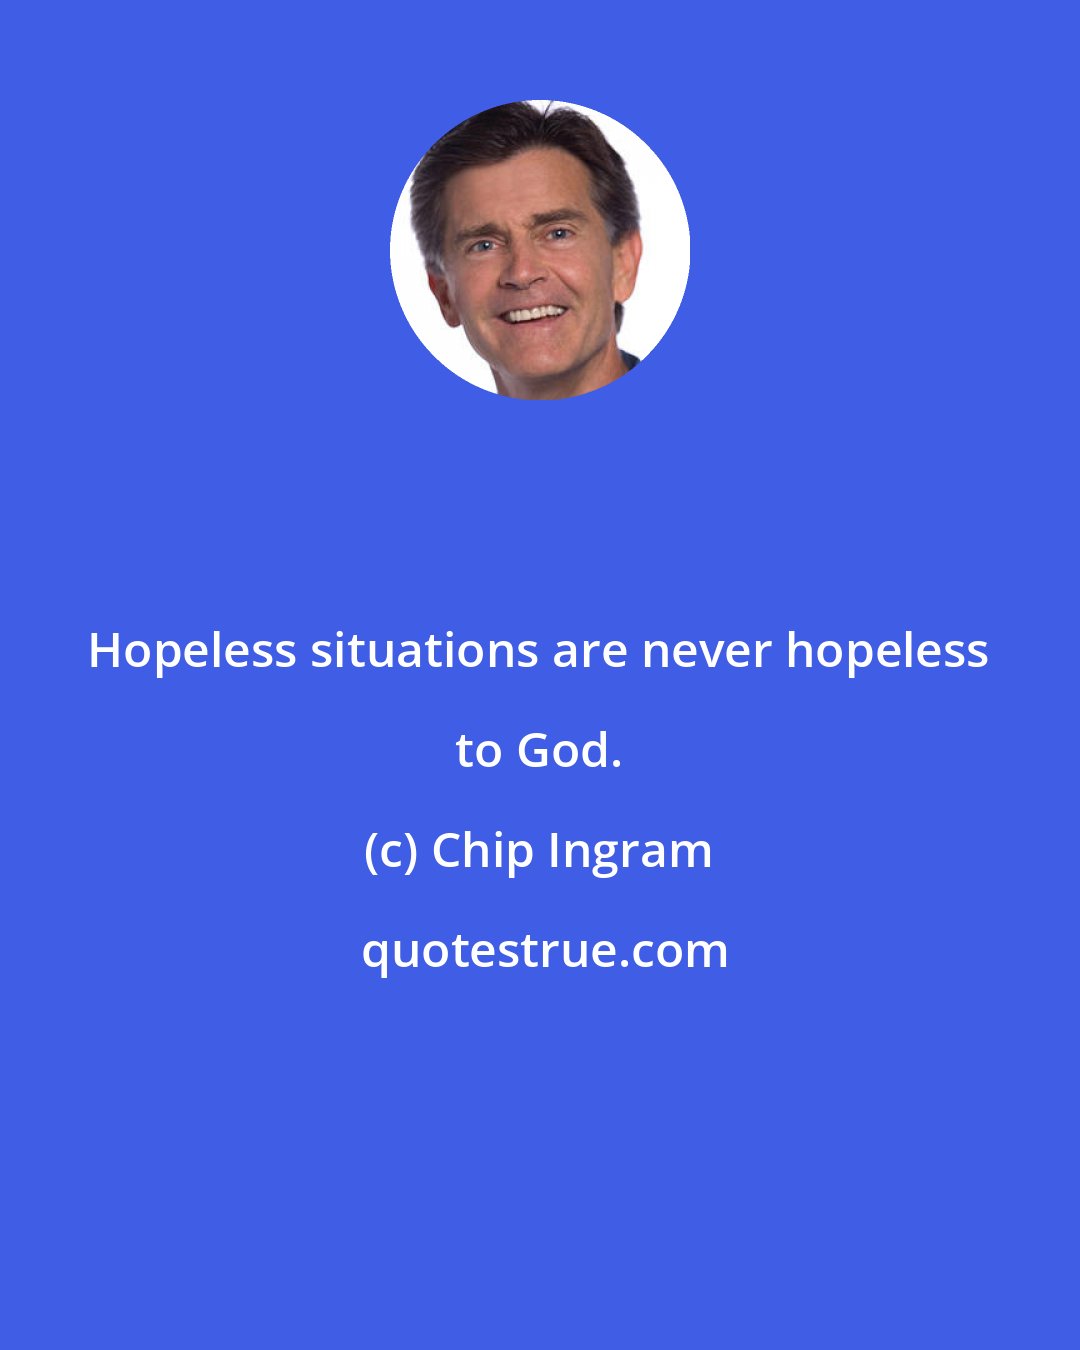 Chip Ingram: Hopeless situations are never hopeless to God.